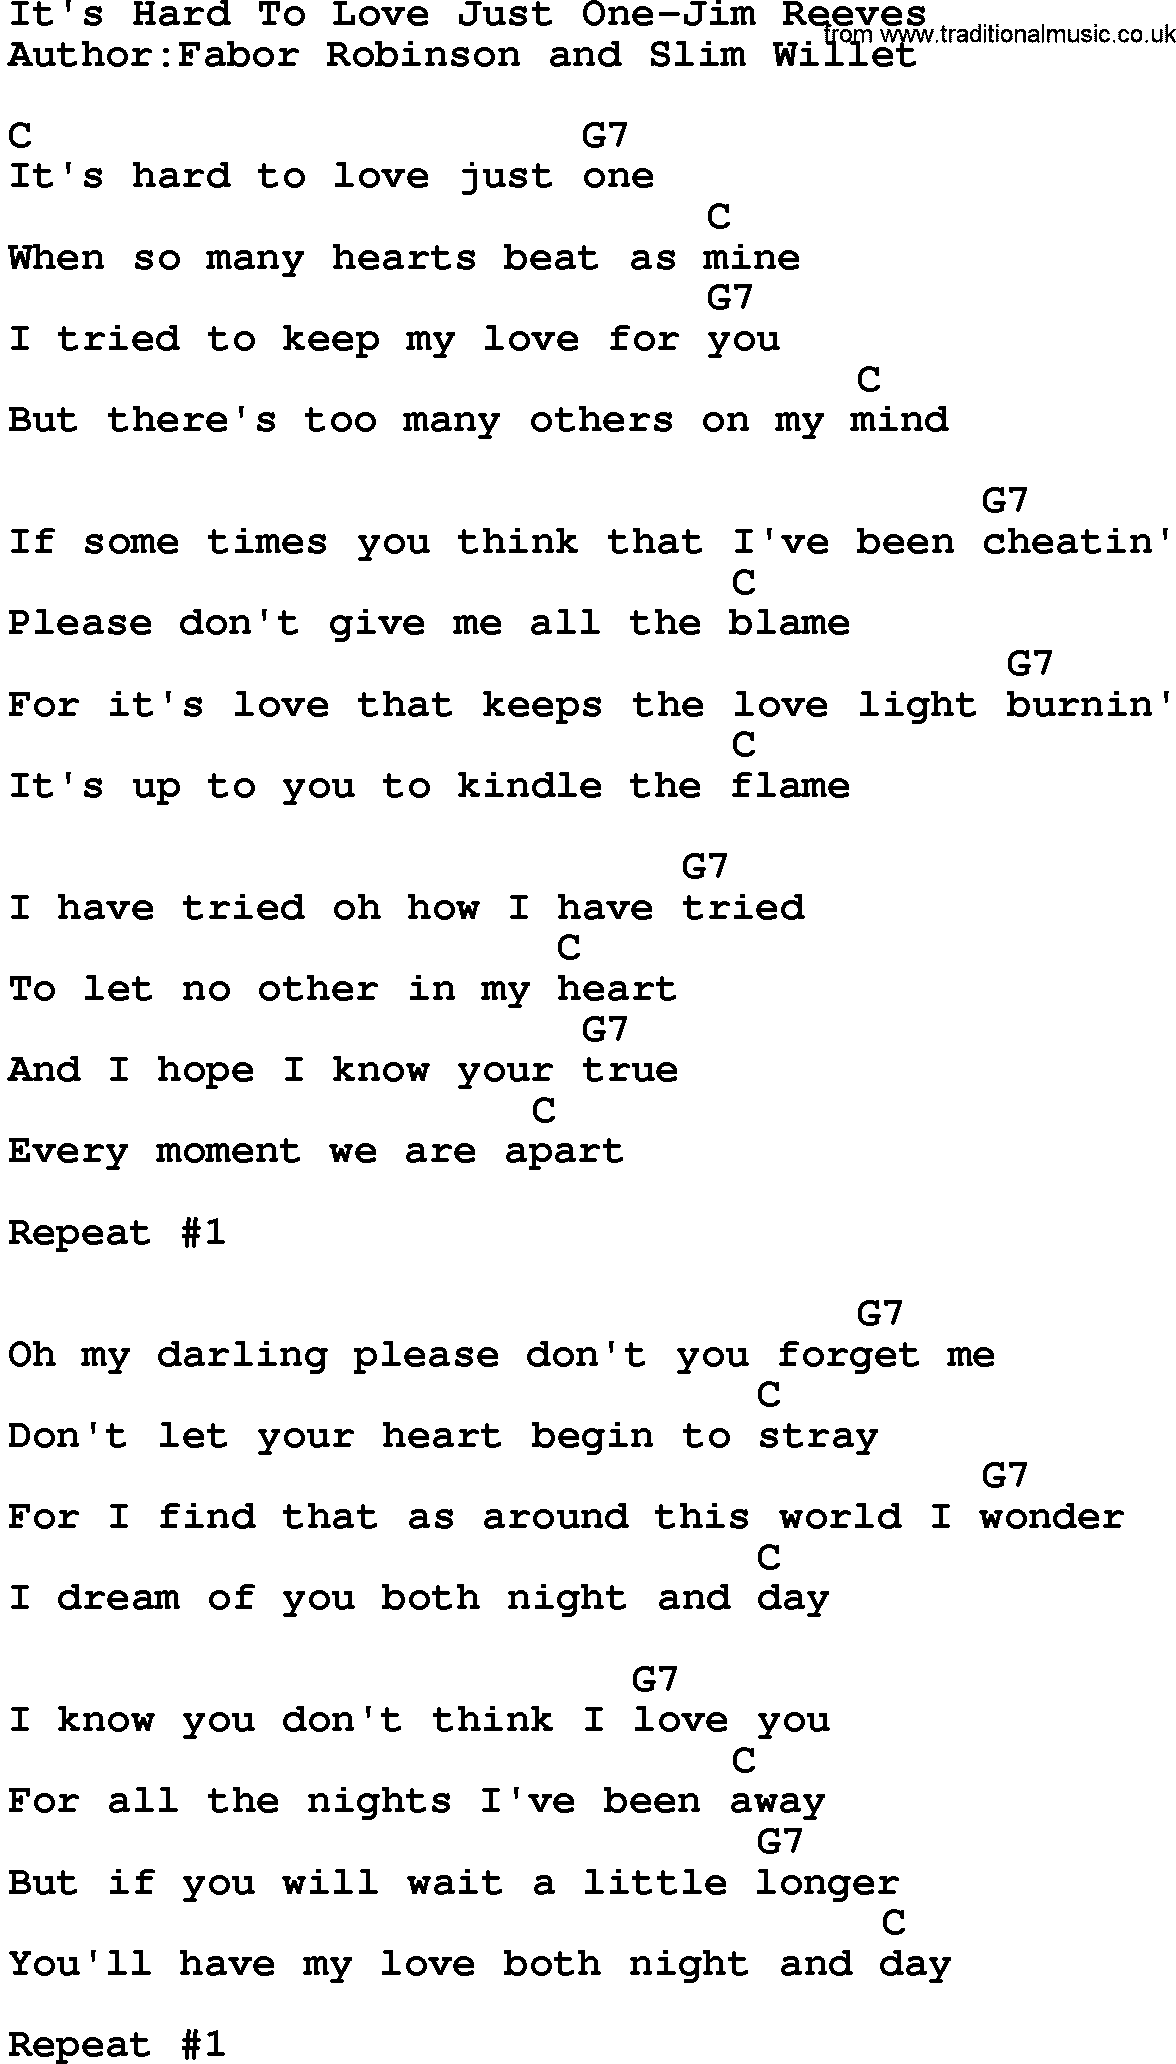 Country music song: It's Hard To Love Just One-Jim Reeves lyrics and chords